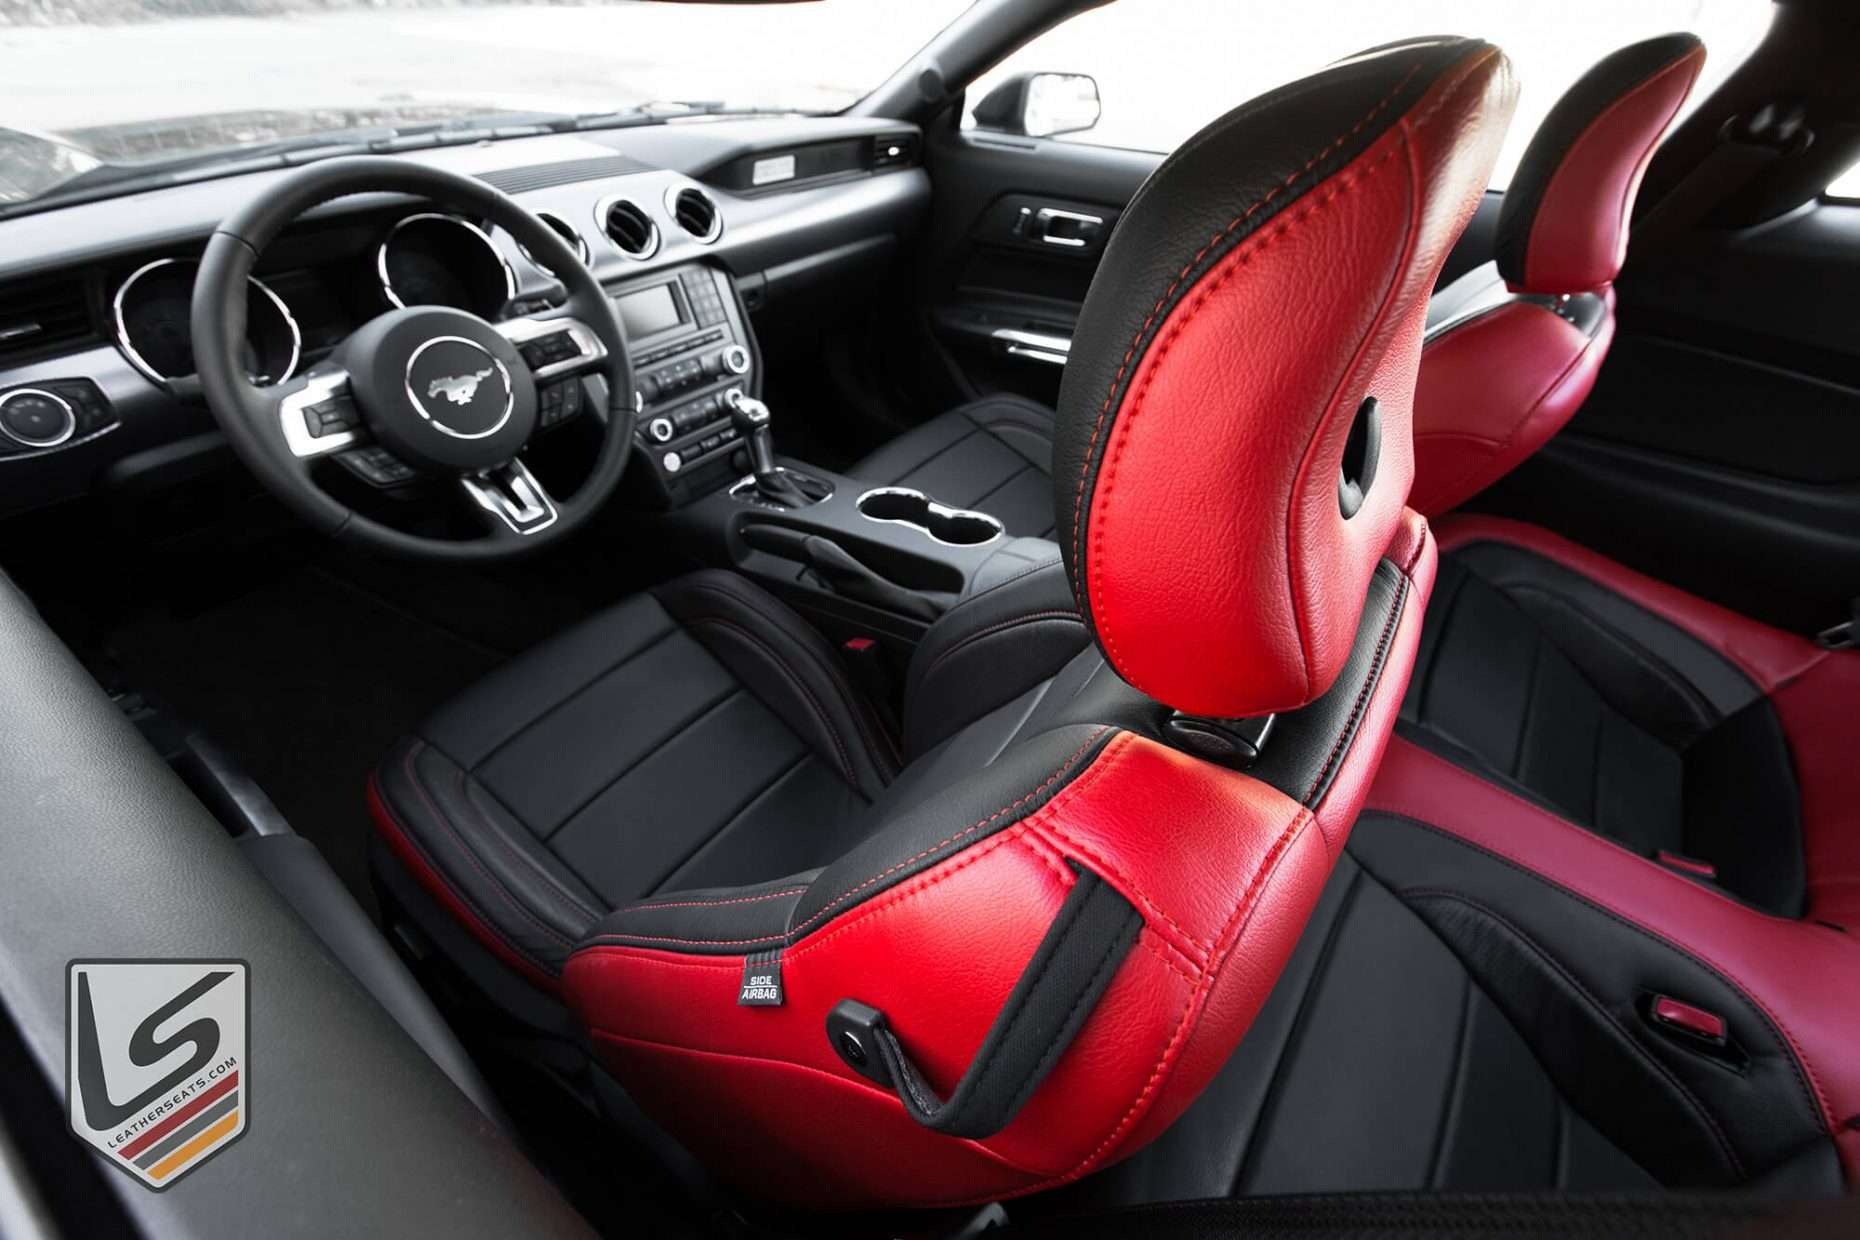 Top-down view of front driver's seat with contrasting Bright Red stitching